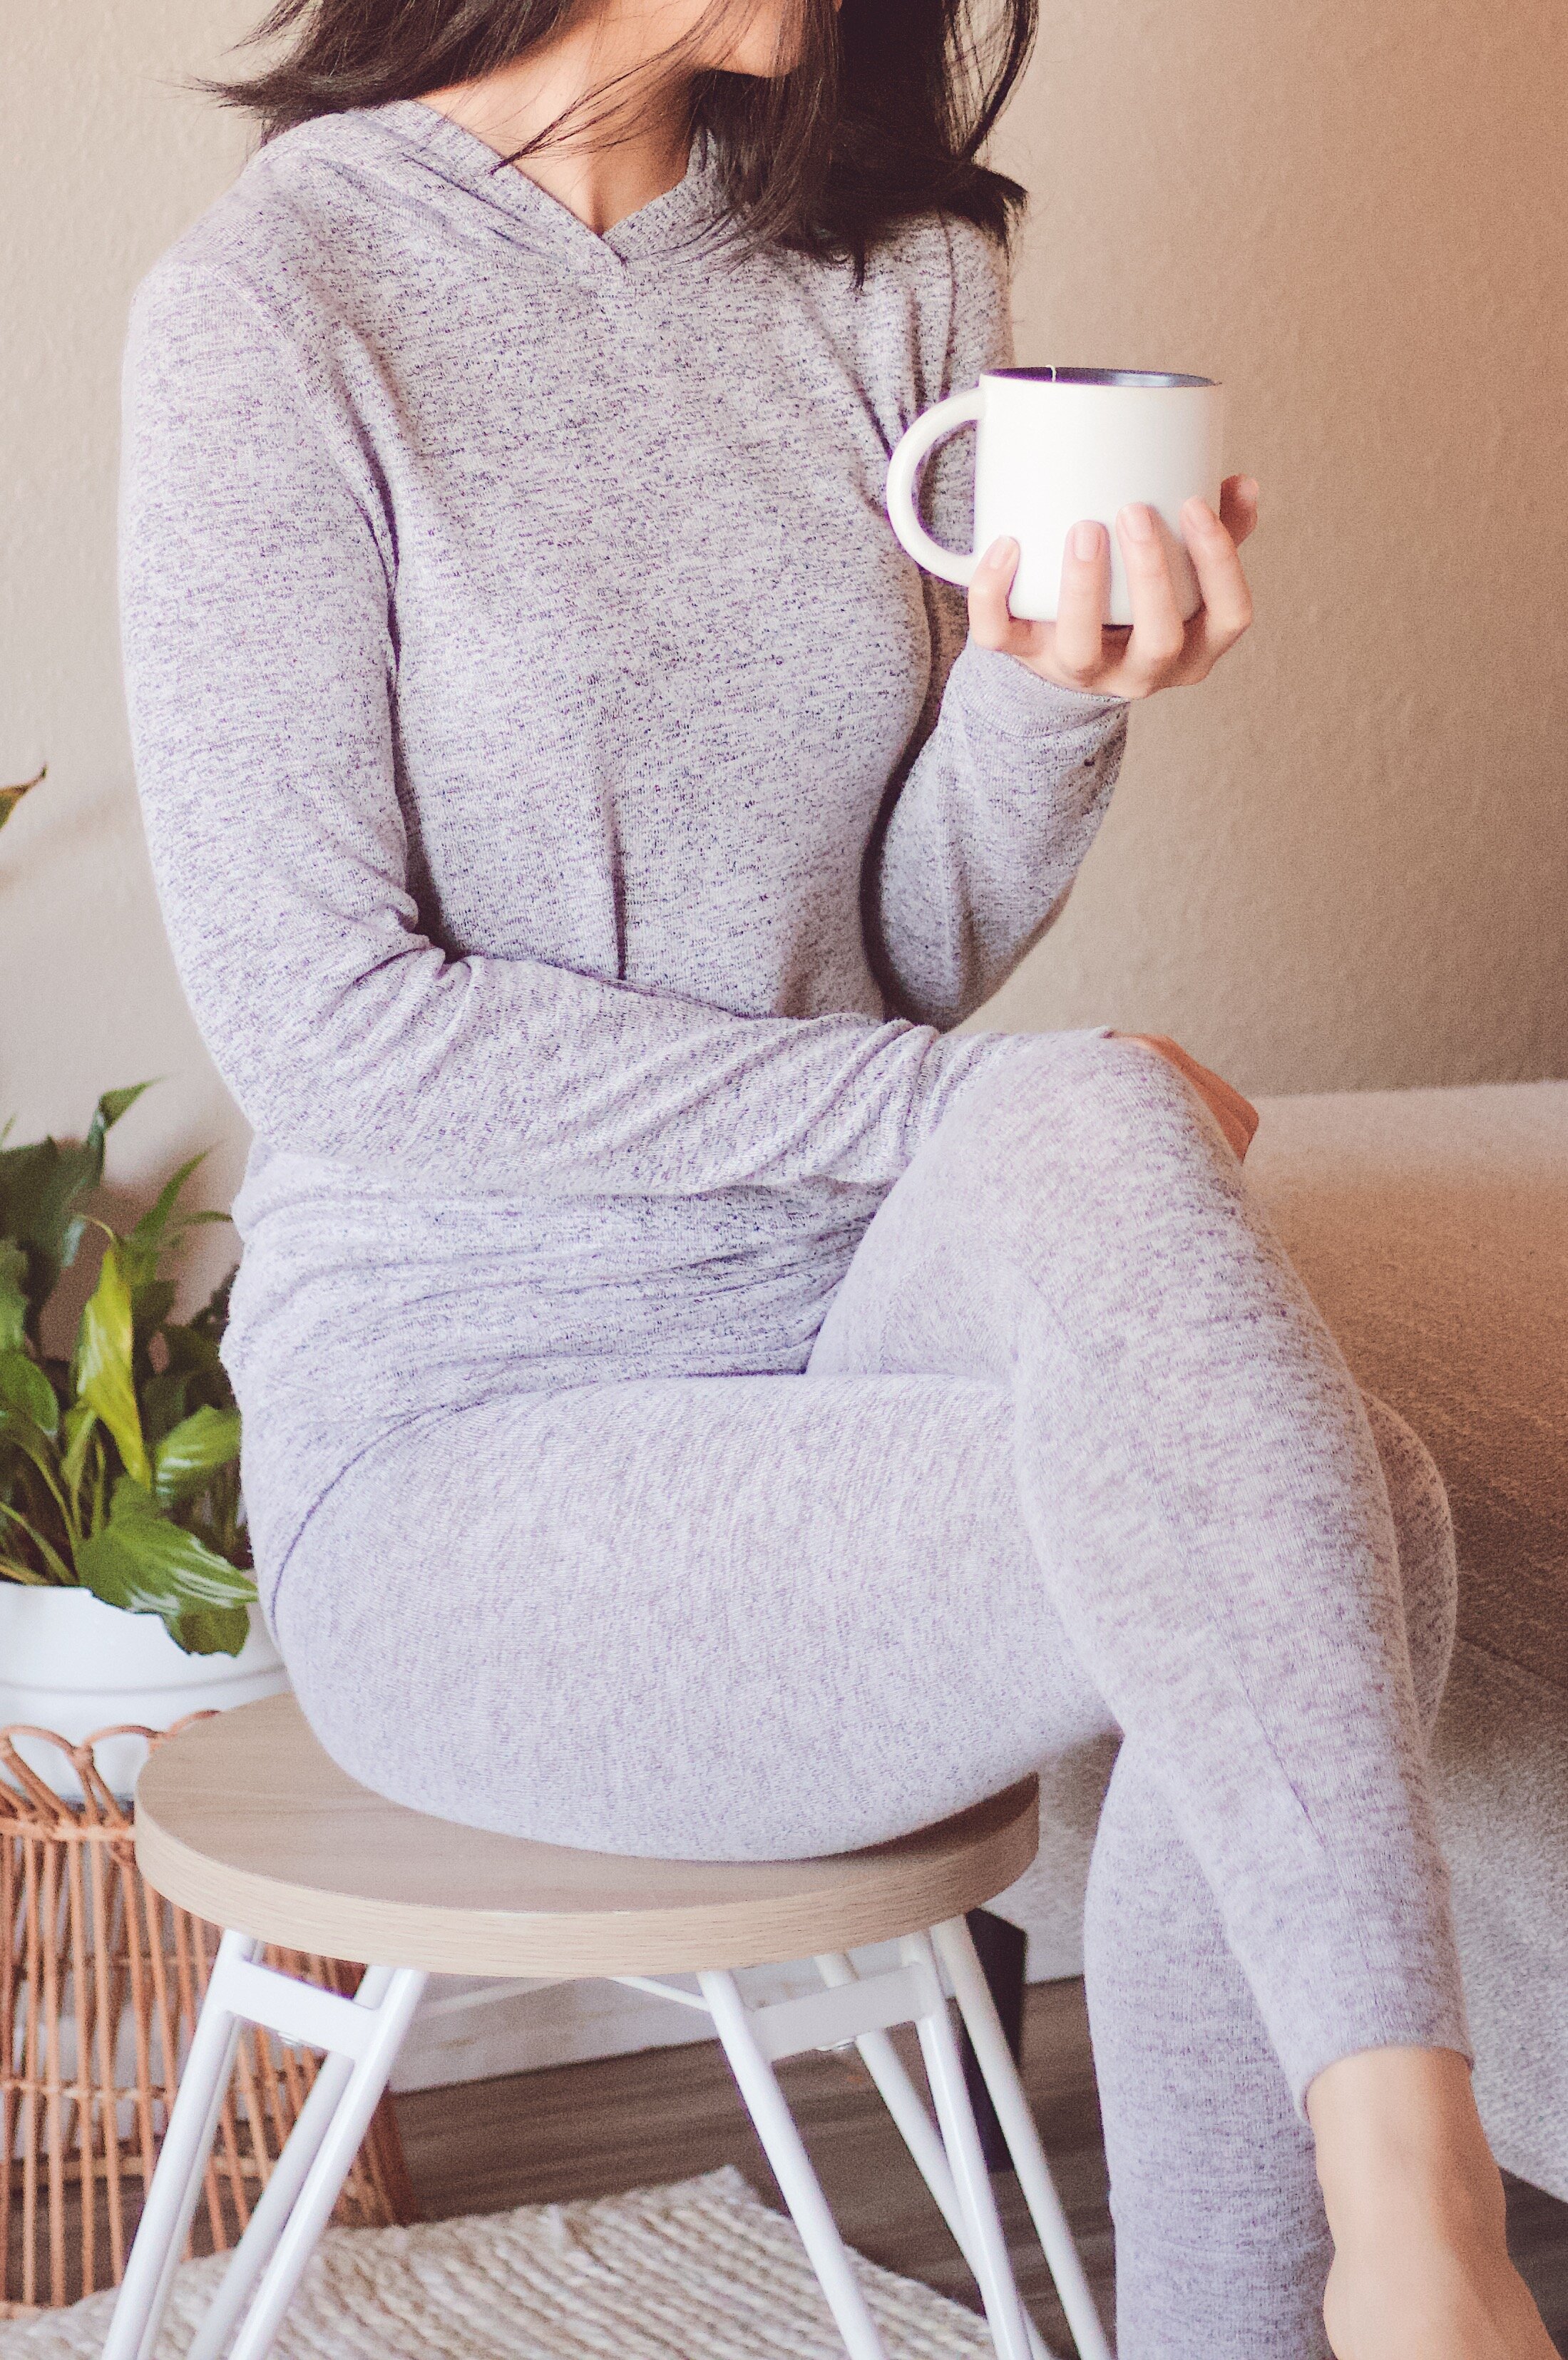 Cozy + Quiet Mornings | #LiveInLayers with Cuddl Duds at Kohl’s to stay warm and cozy this season | hellolovelyliving.com